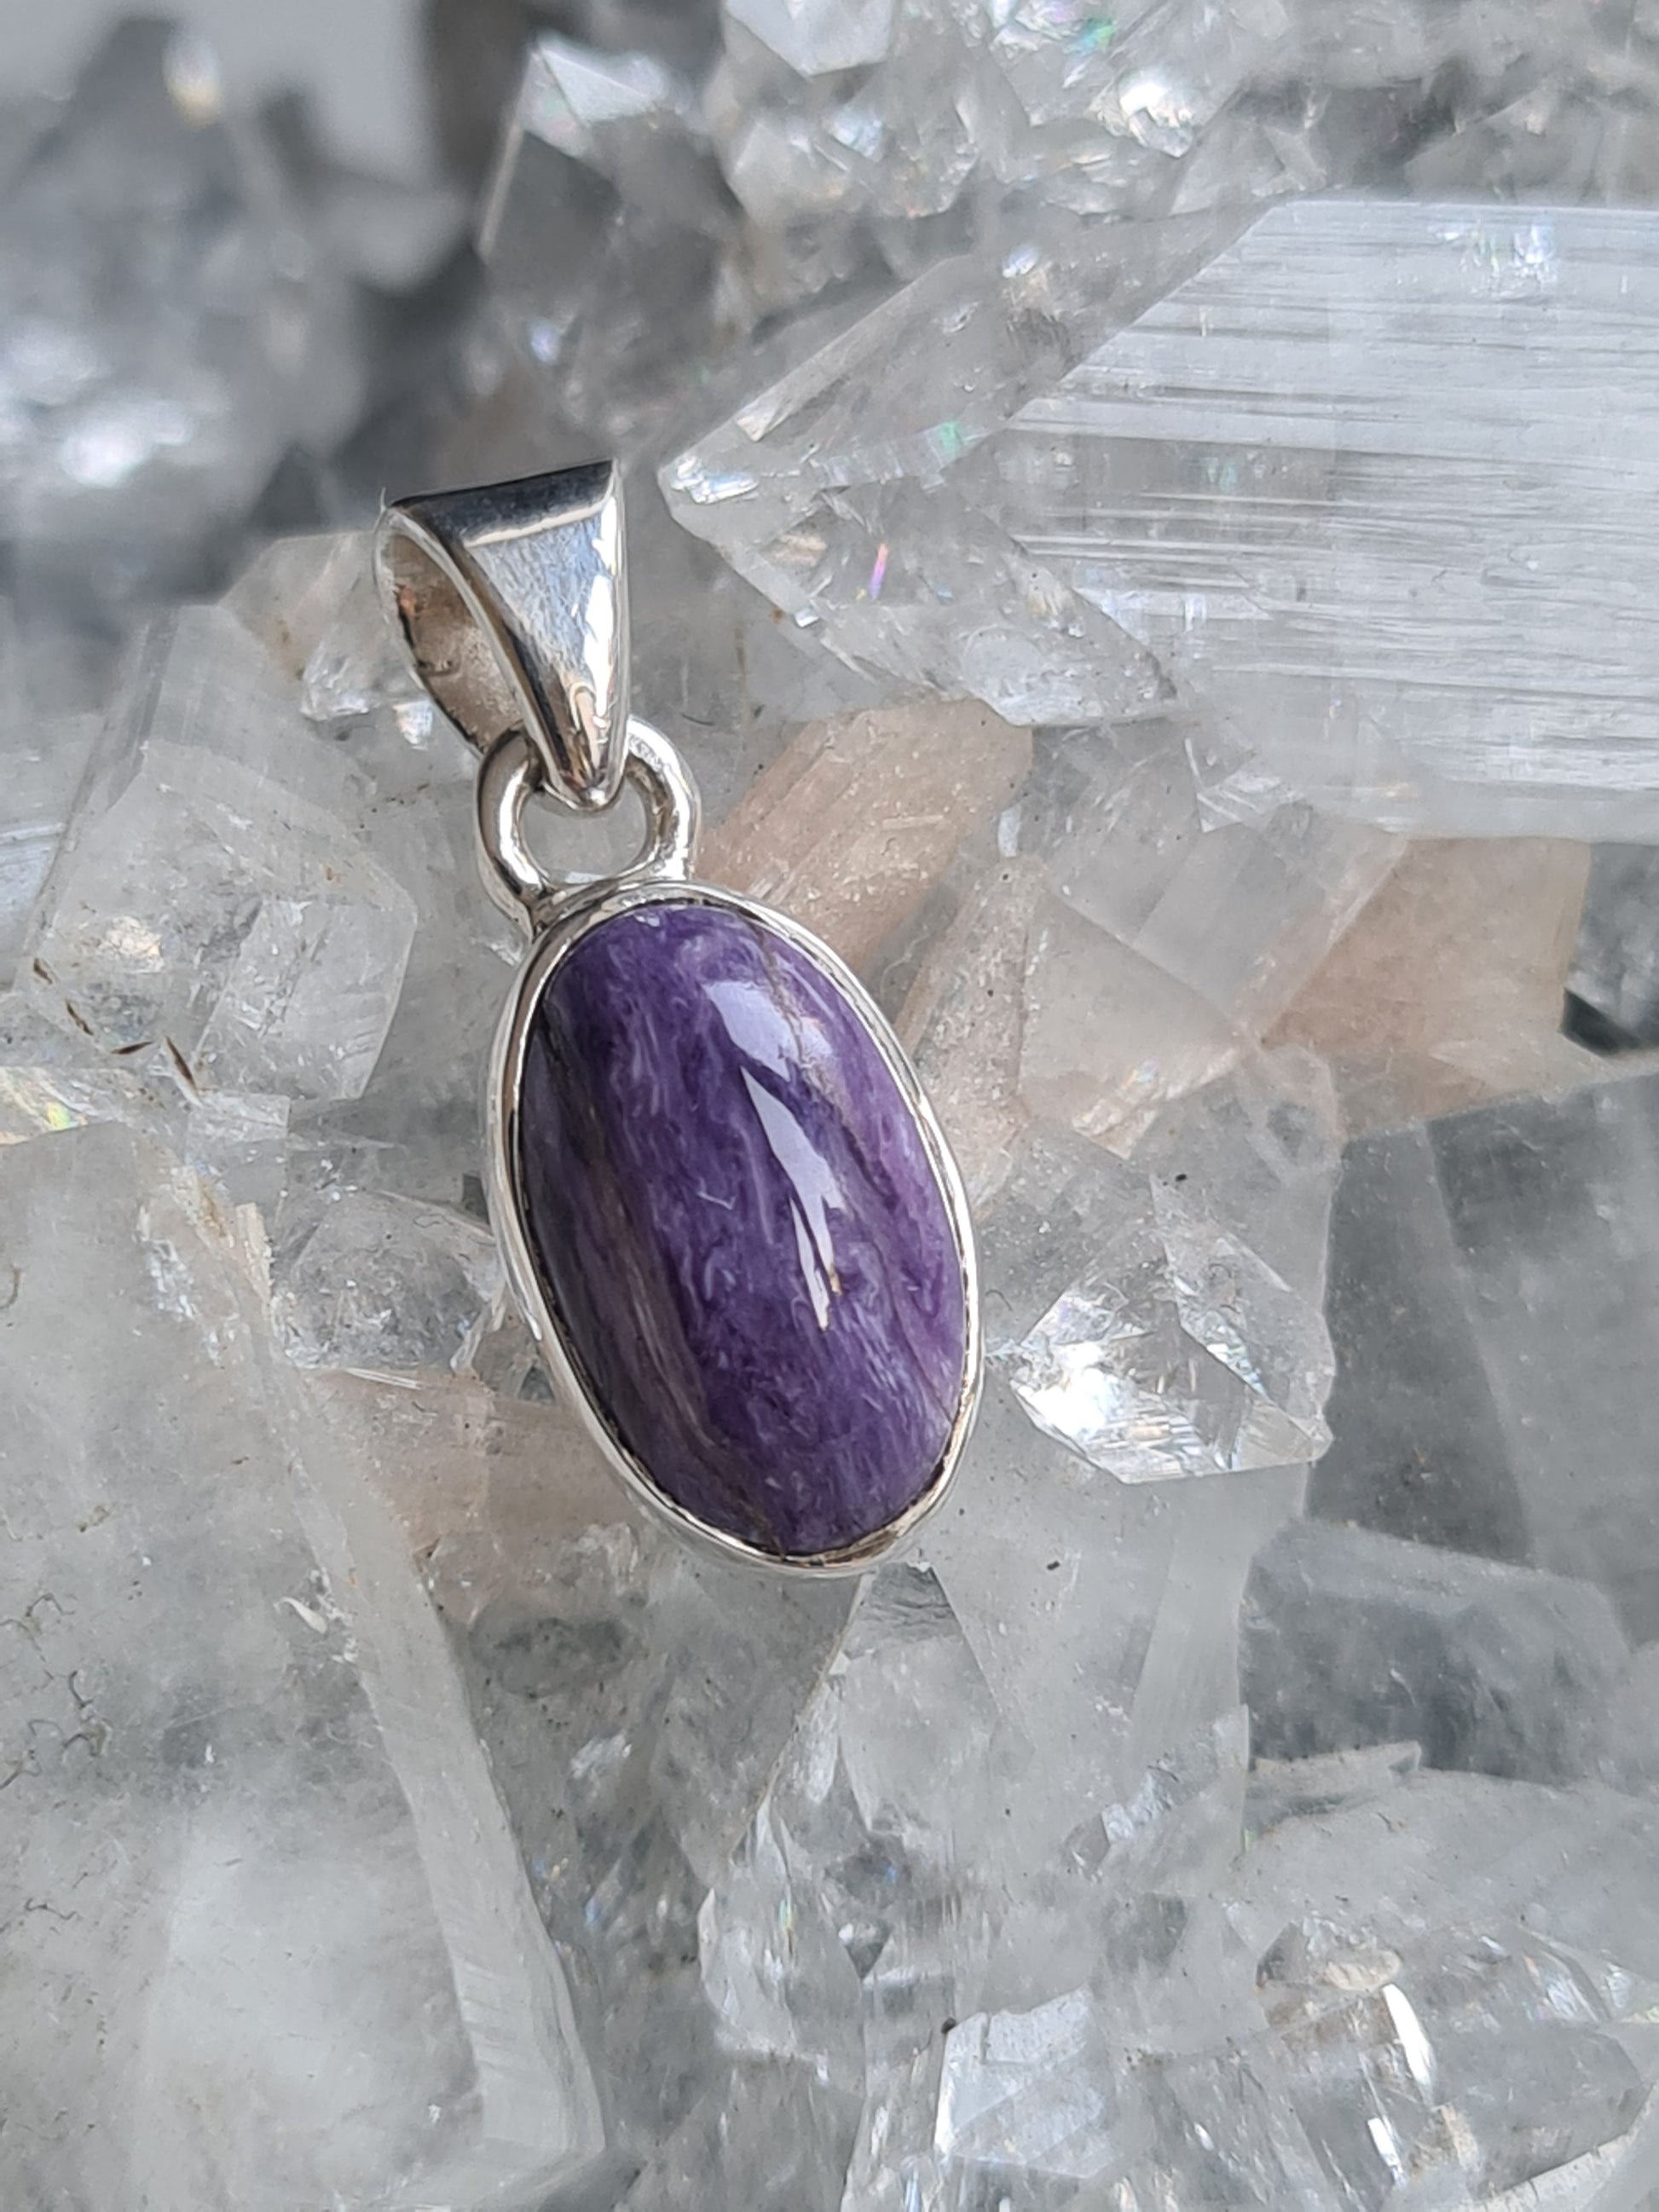 Natural Russian Purple Charoite Pendant in Sterling Silver. Oval shape.
Photographed on a diamond apophyllite cluster.